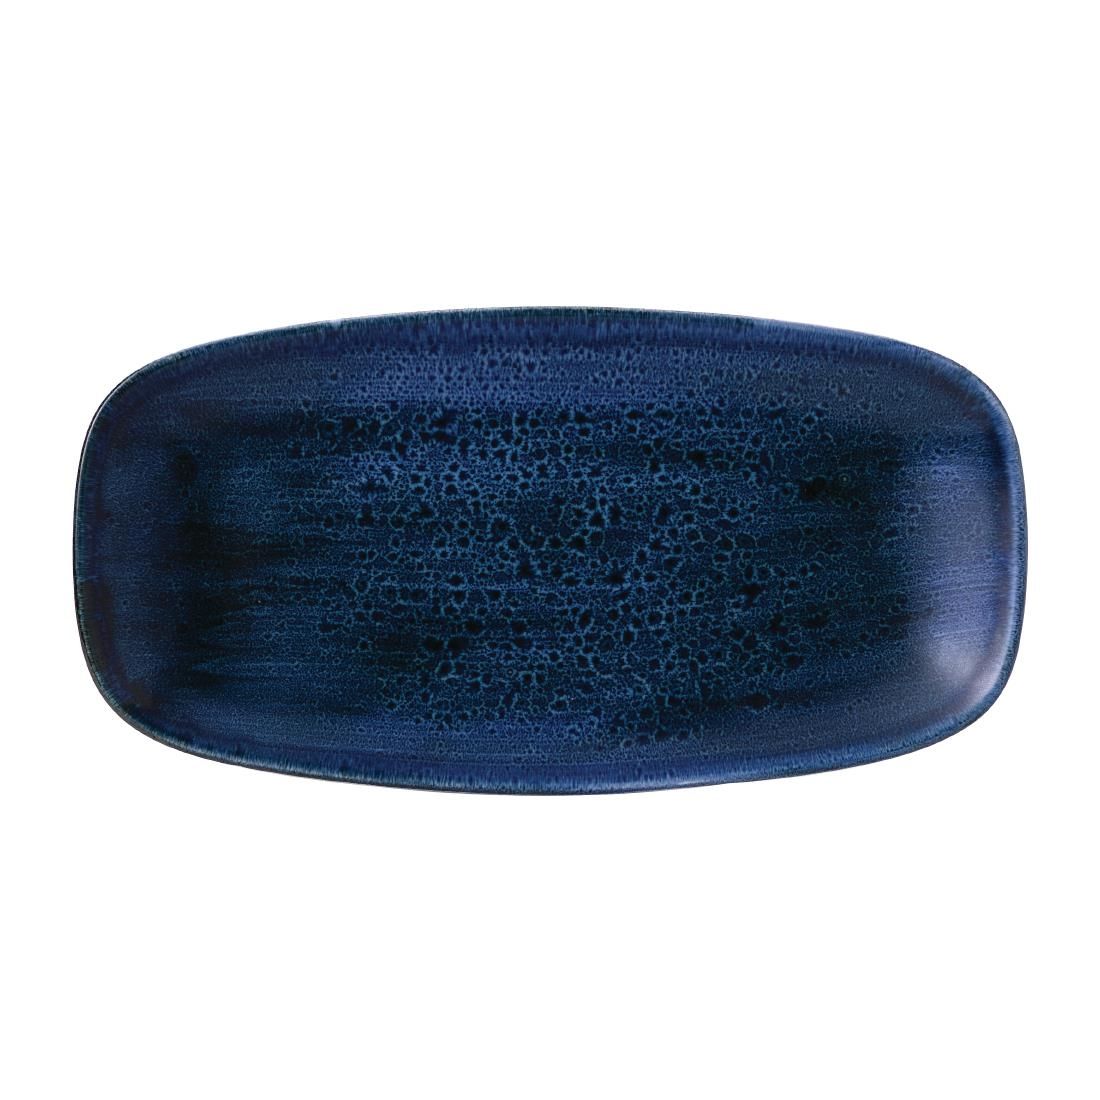 FJ953 Stonecast Plume Ultramarine Chefs' Oblong Plate No. 3 11 3/4 x 6 " (Pack of 12)